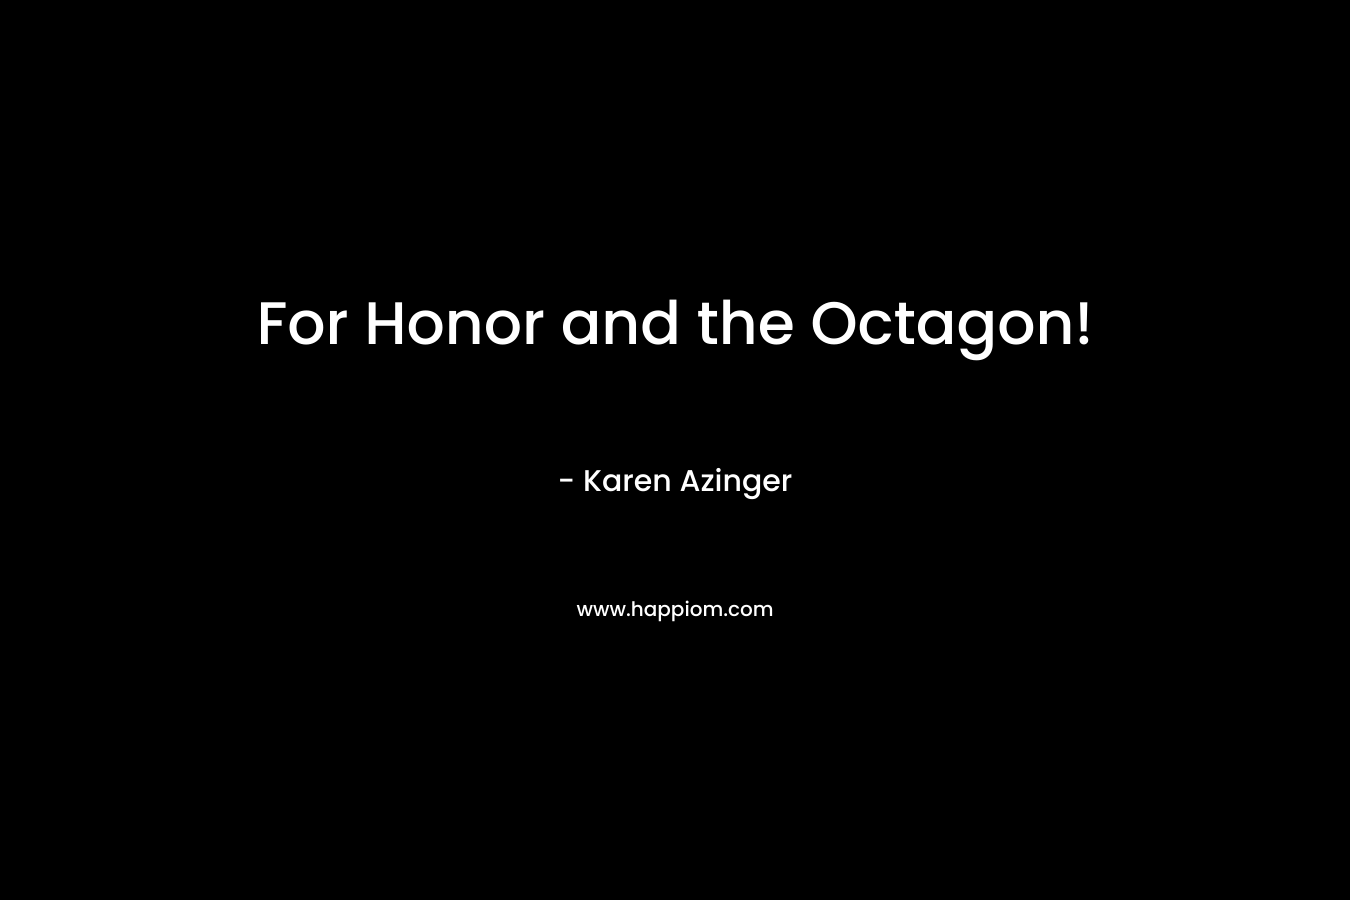 For Honor and the Octagon!